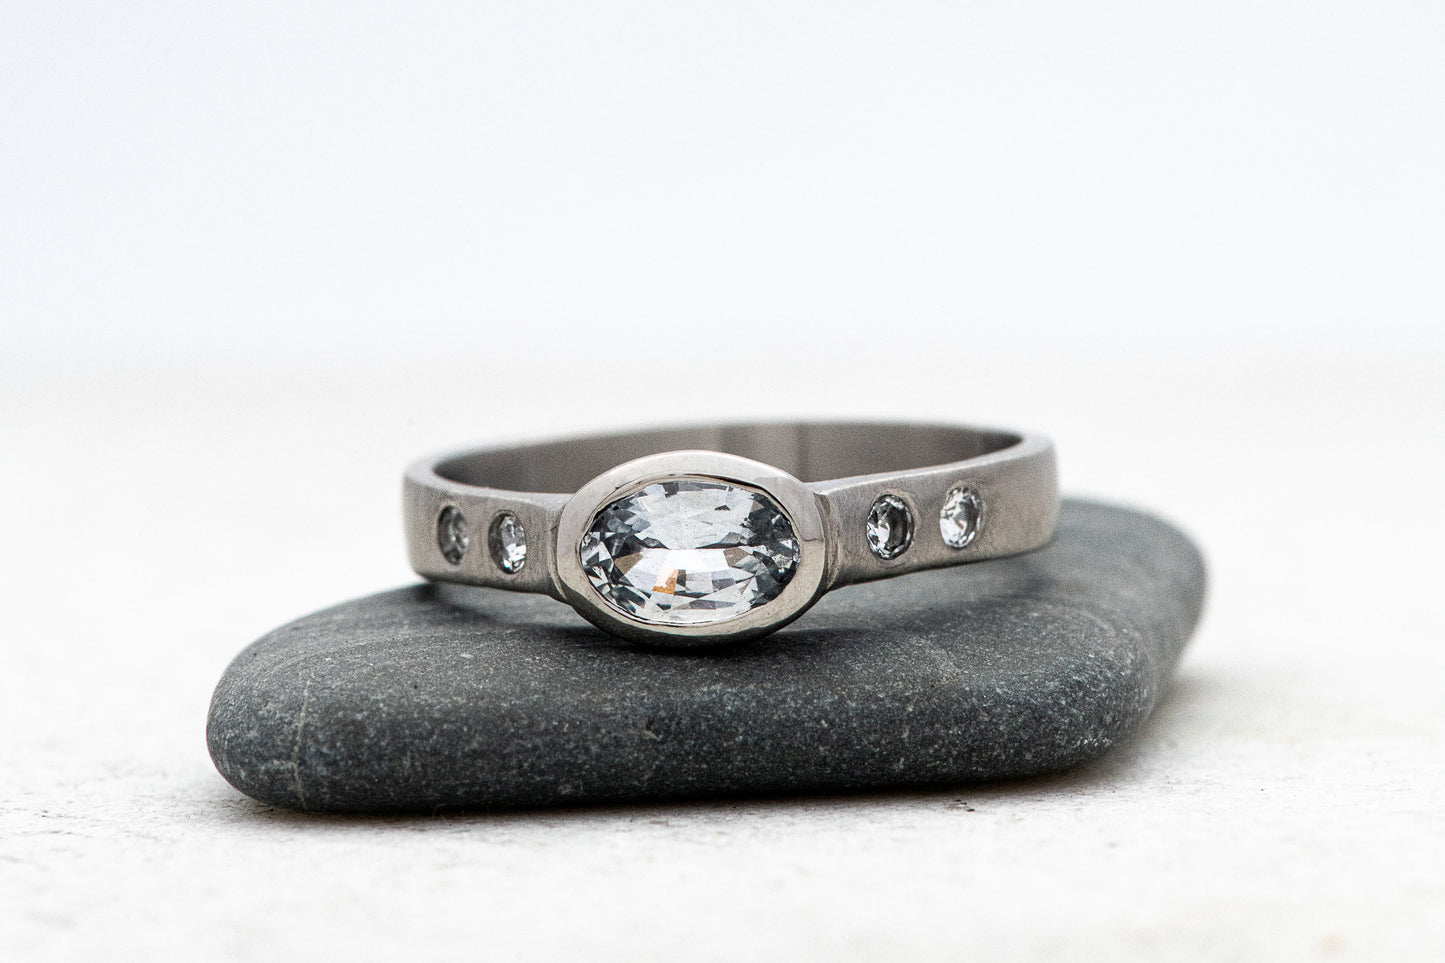 A Handmade White Sapphire Engagement Ring from Cassin Jewelry.